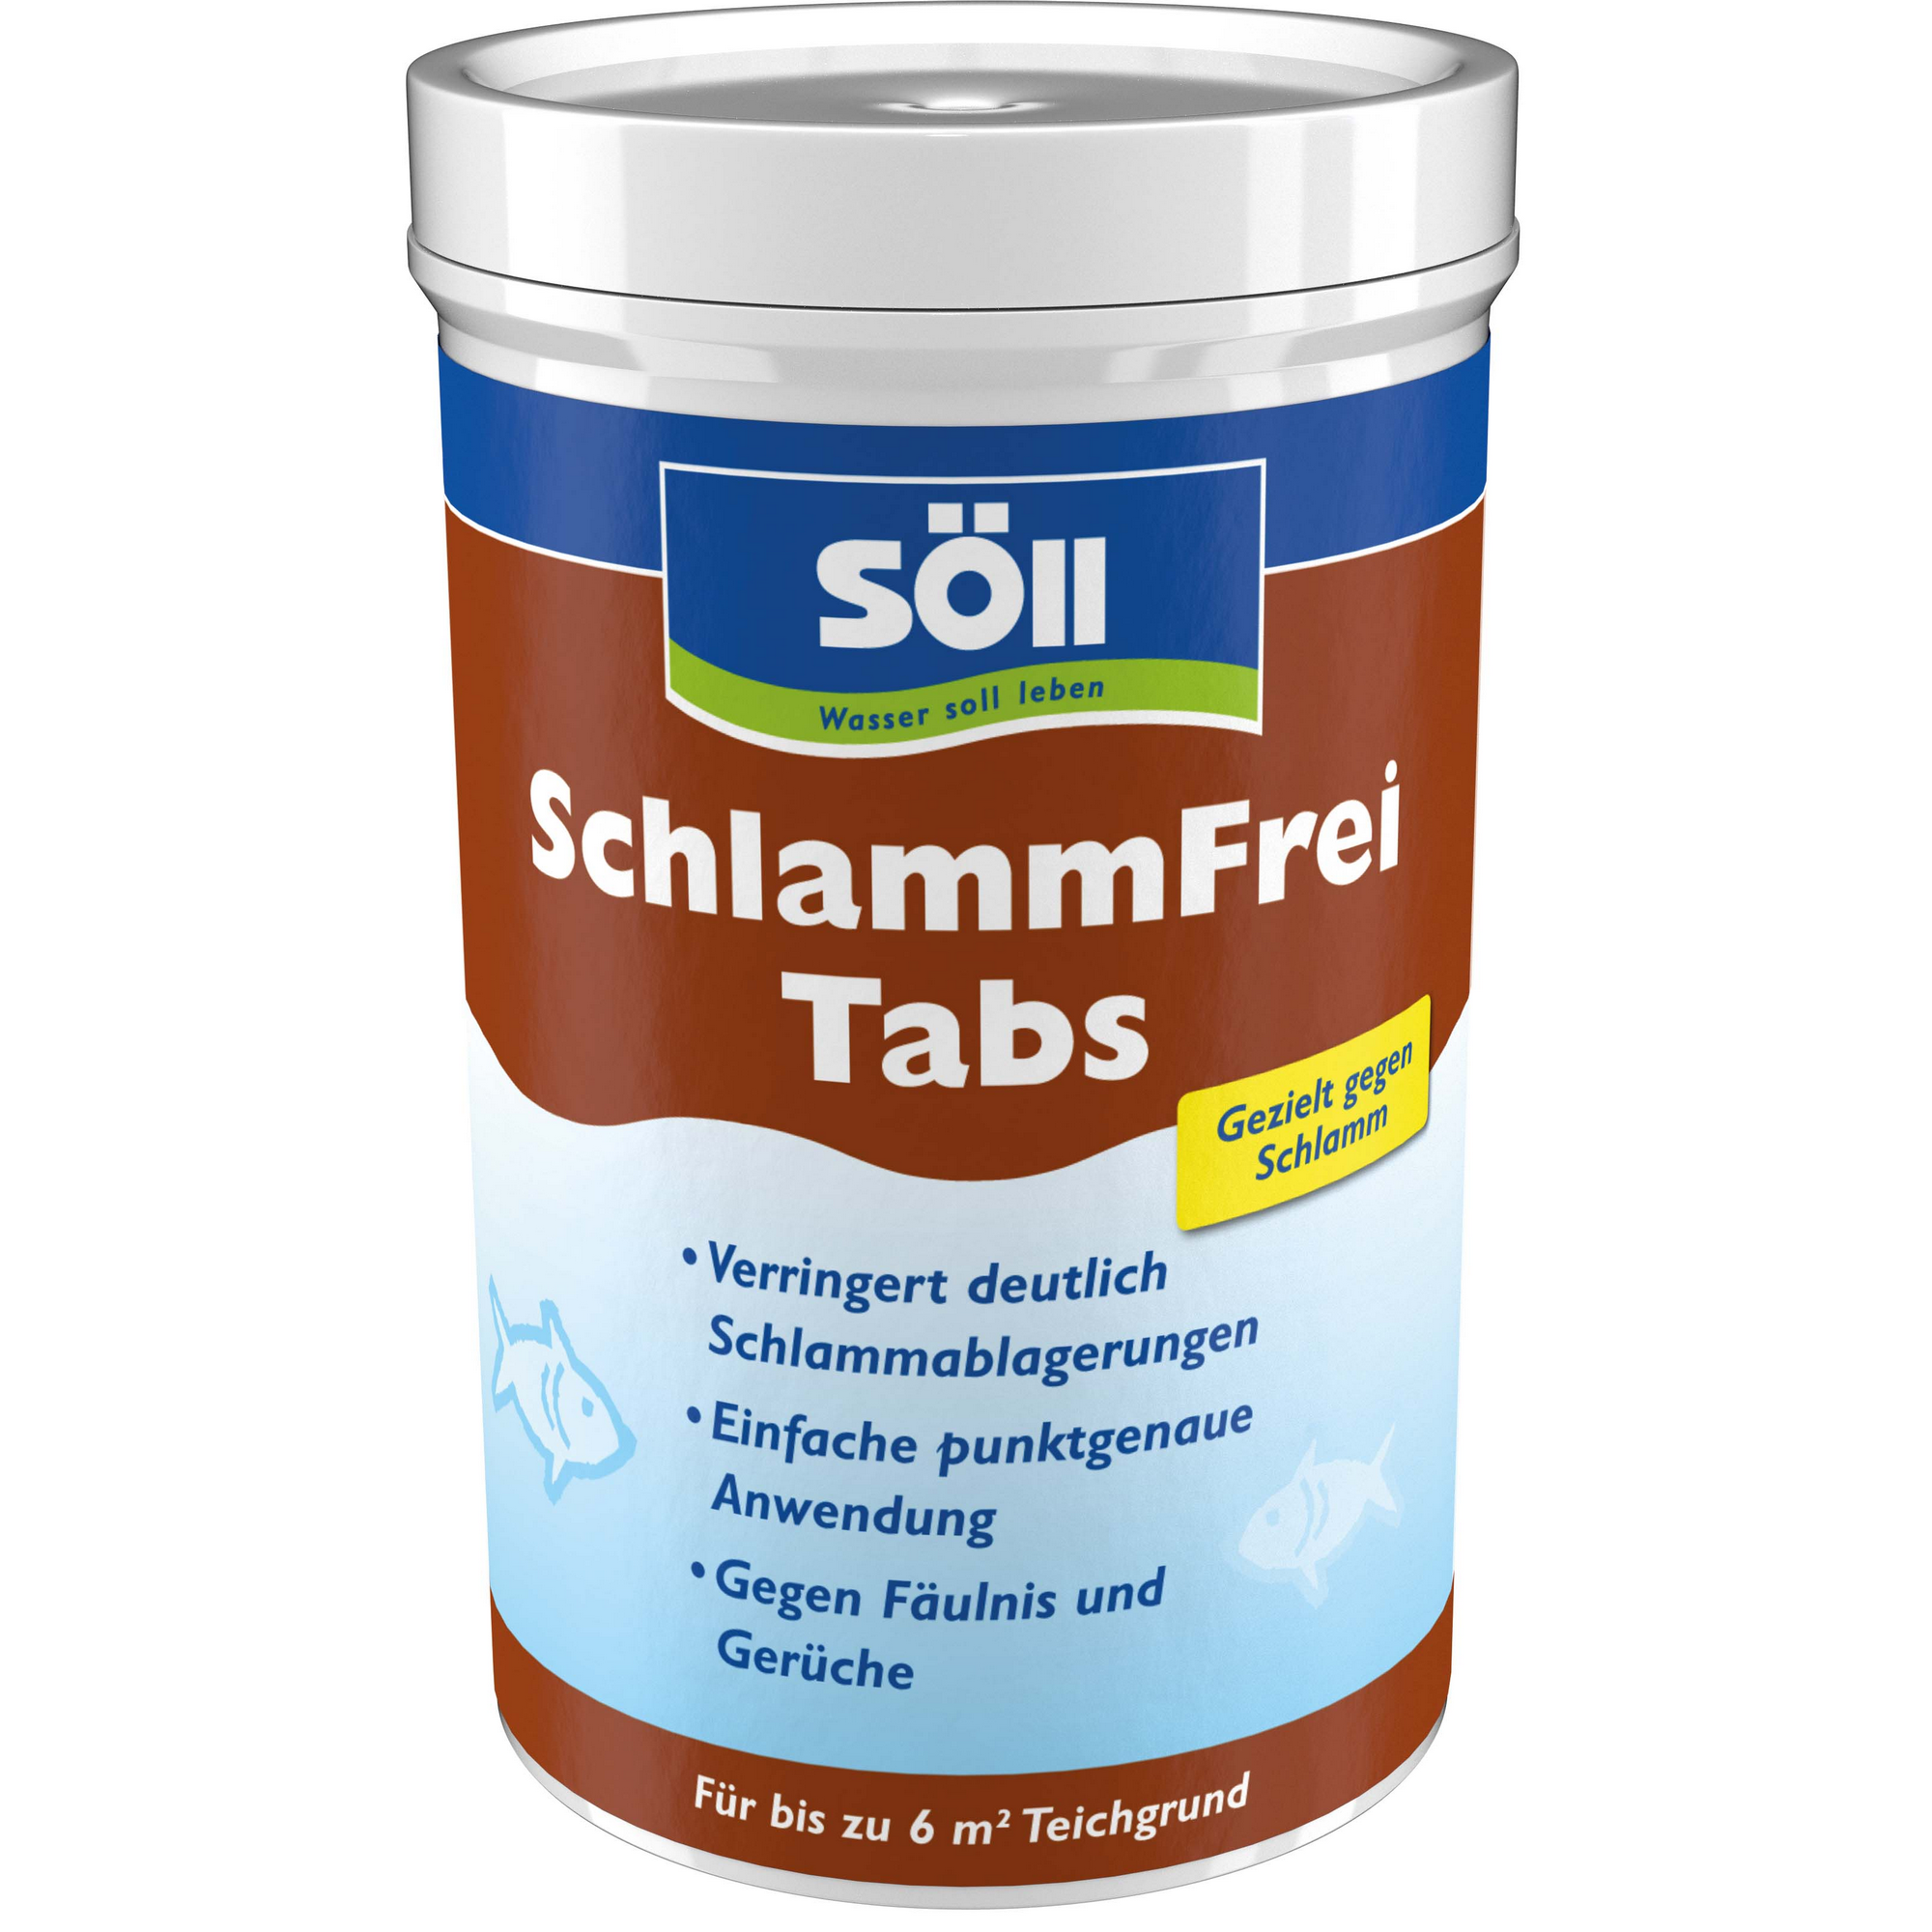 Schlamm-Frei Tabs 6 Tabs + product picture